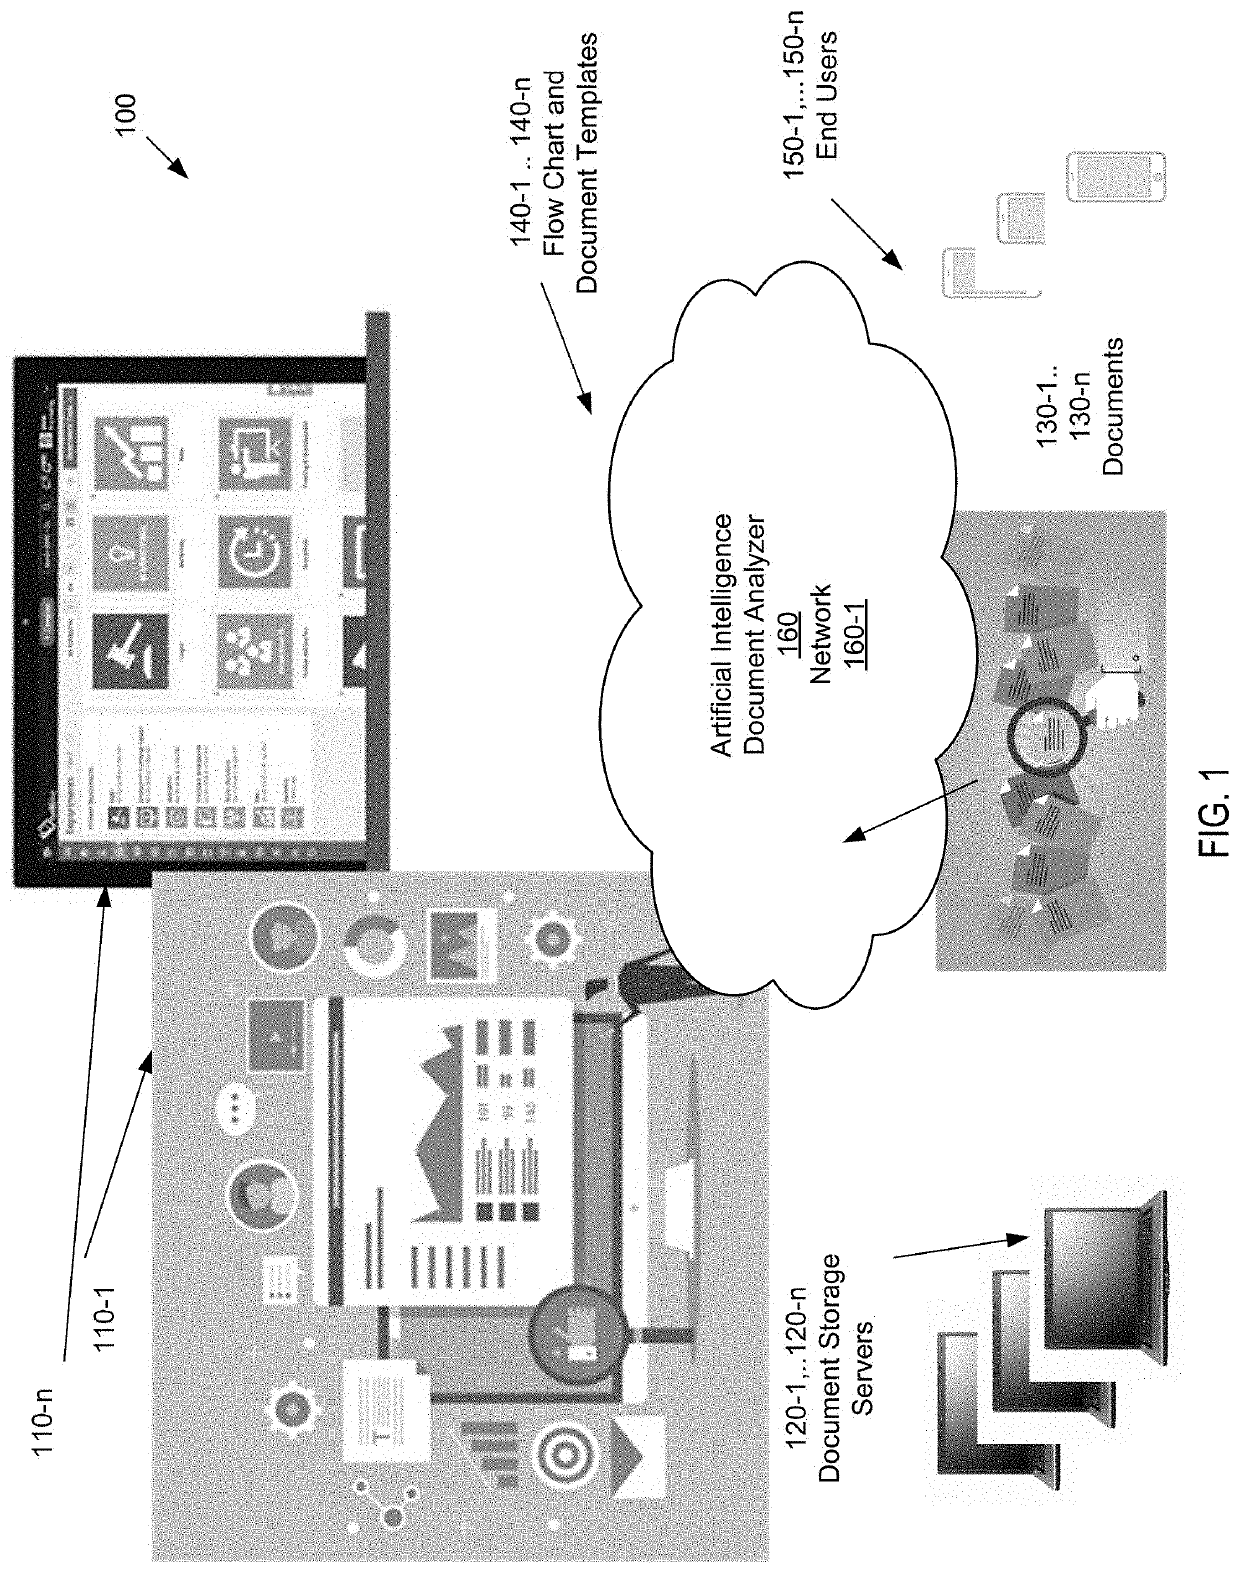 Systems and methods of automated document template creation using artificial intelligence